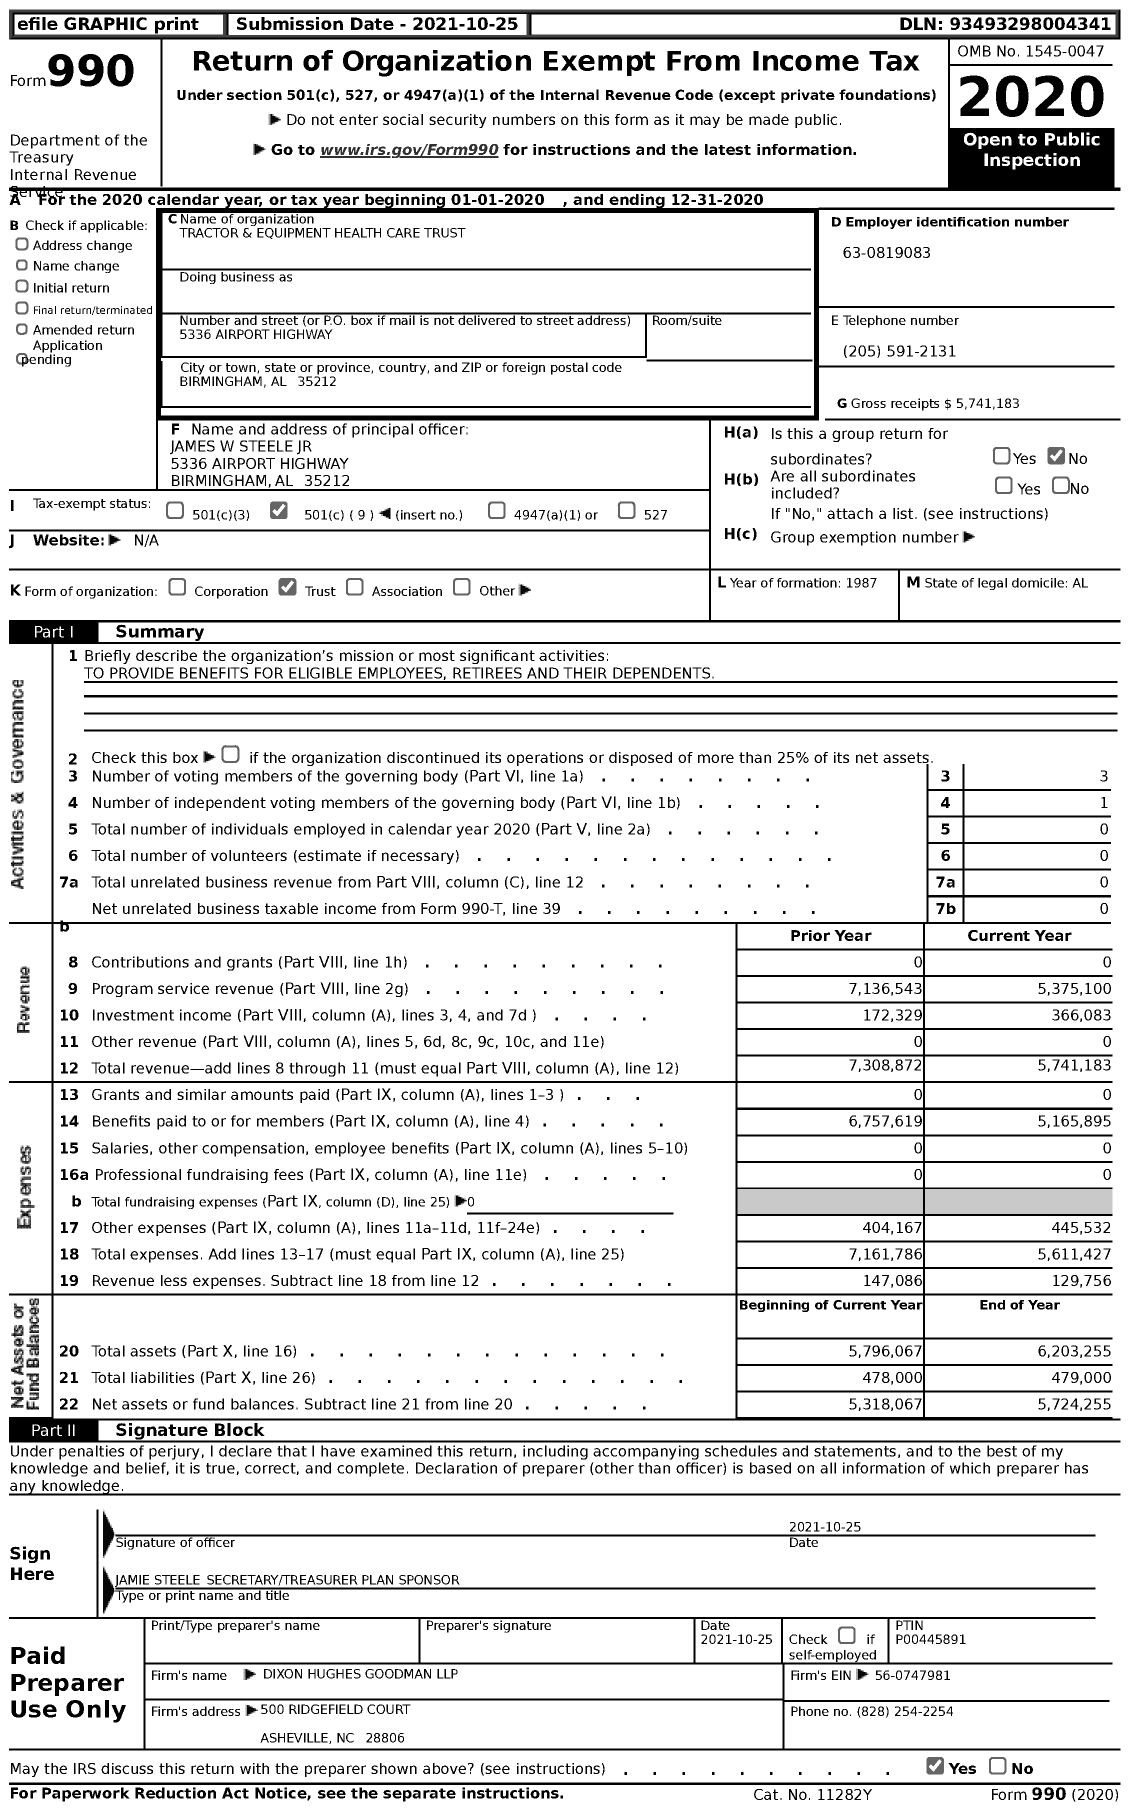 Image of first page of 2020 Form 990 for Tractor and Equipment Health Care Trust